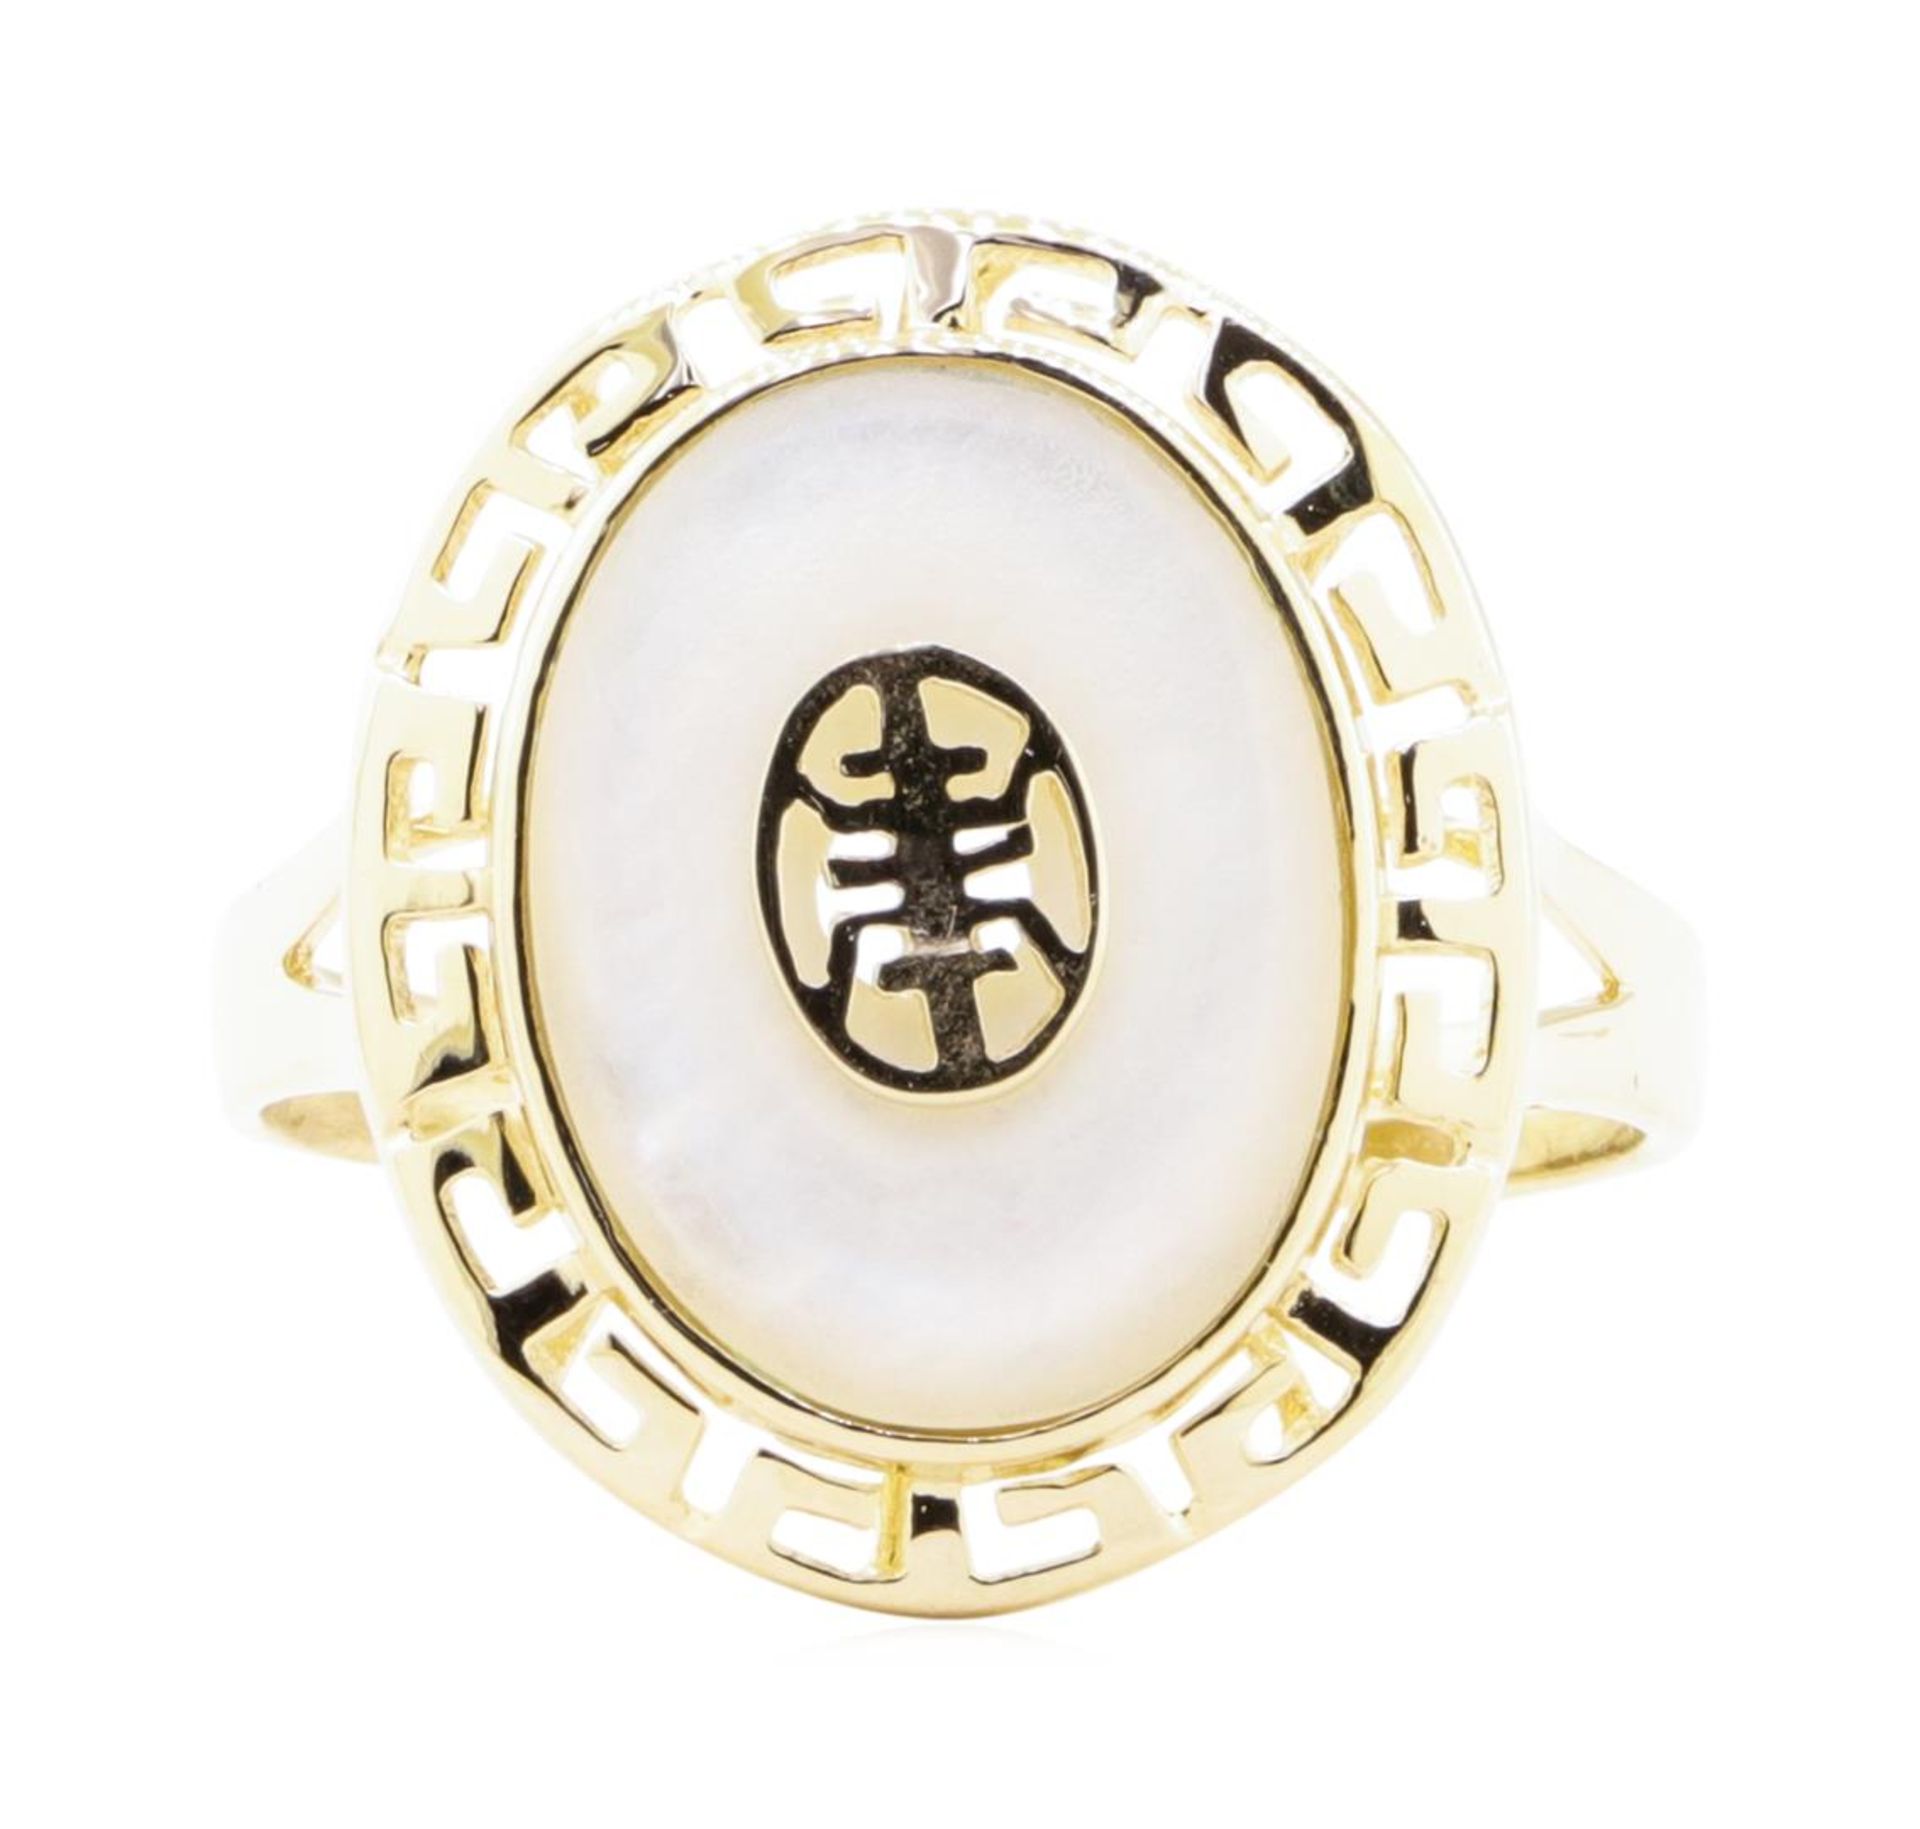 Inlaid Mother of Pearl Ring - 14KT Yellow Gold - Image 2 of 4